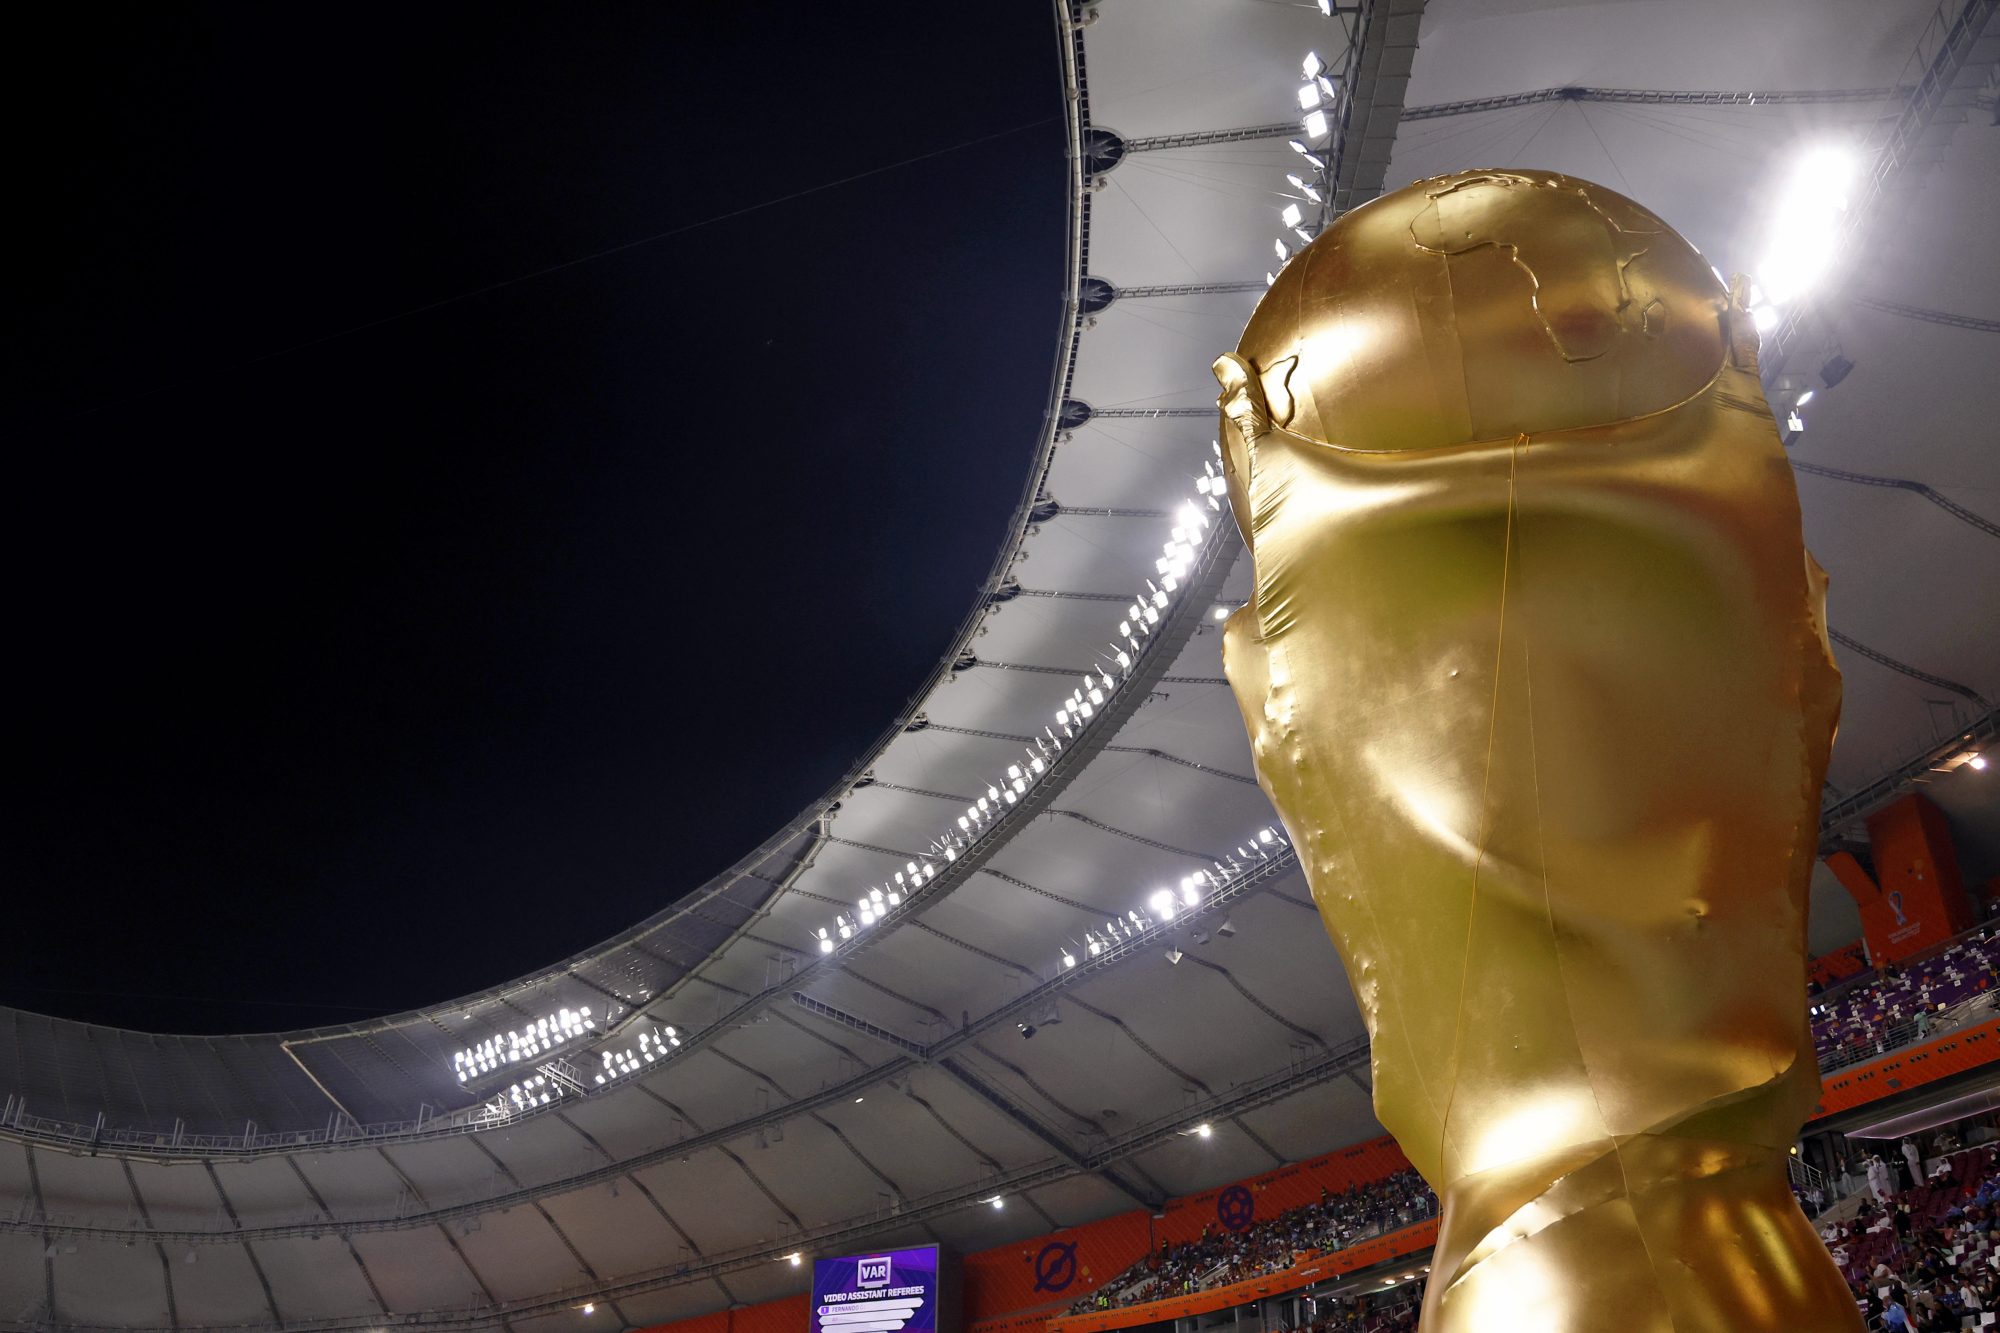 Dec 1, 2022; Doha, Qatar; A general view of a replica World Cup trophy before a group stage match between Spain and Japan during the 2022 World Cup at Khalifa International Stadium.